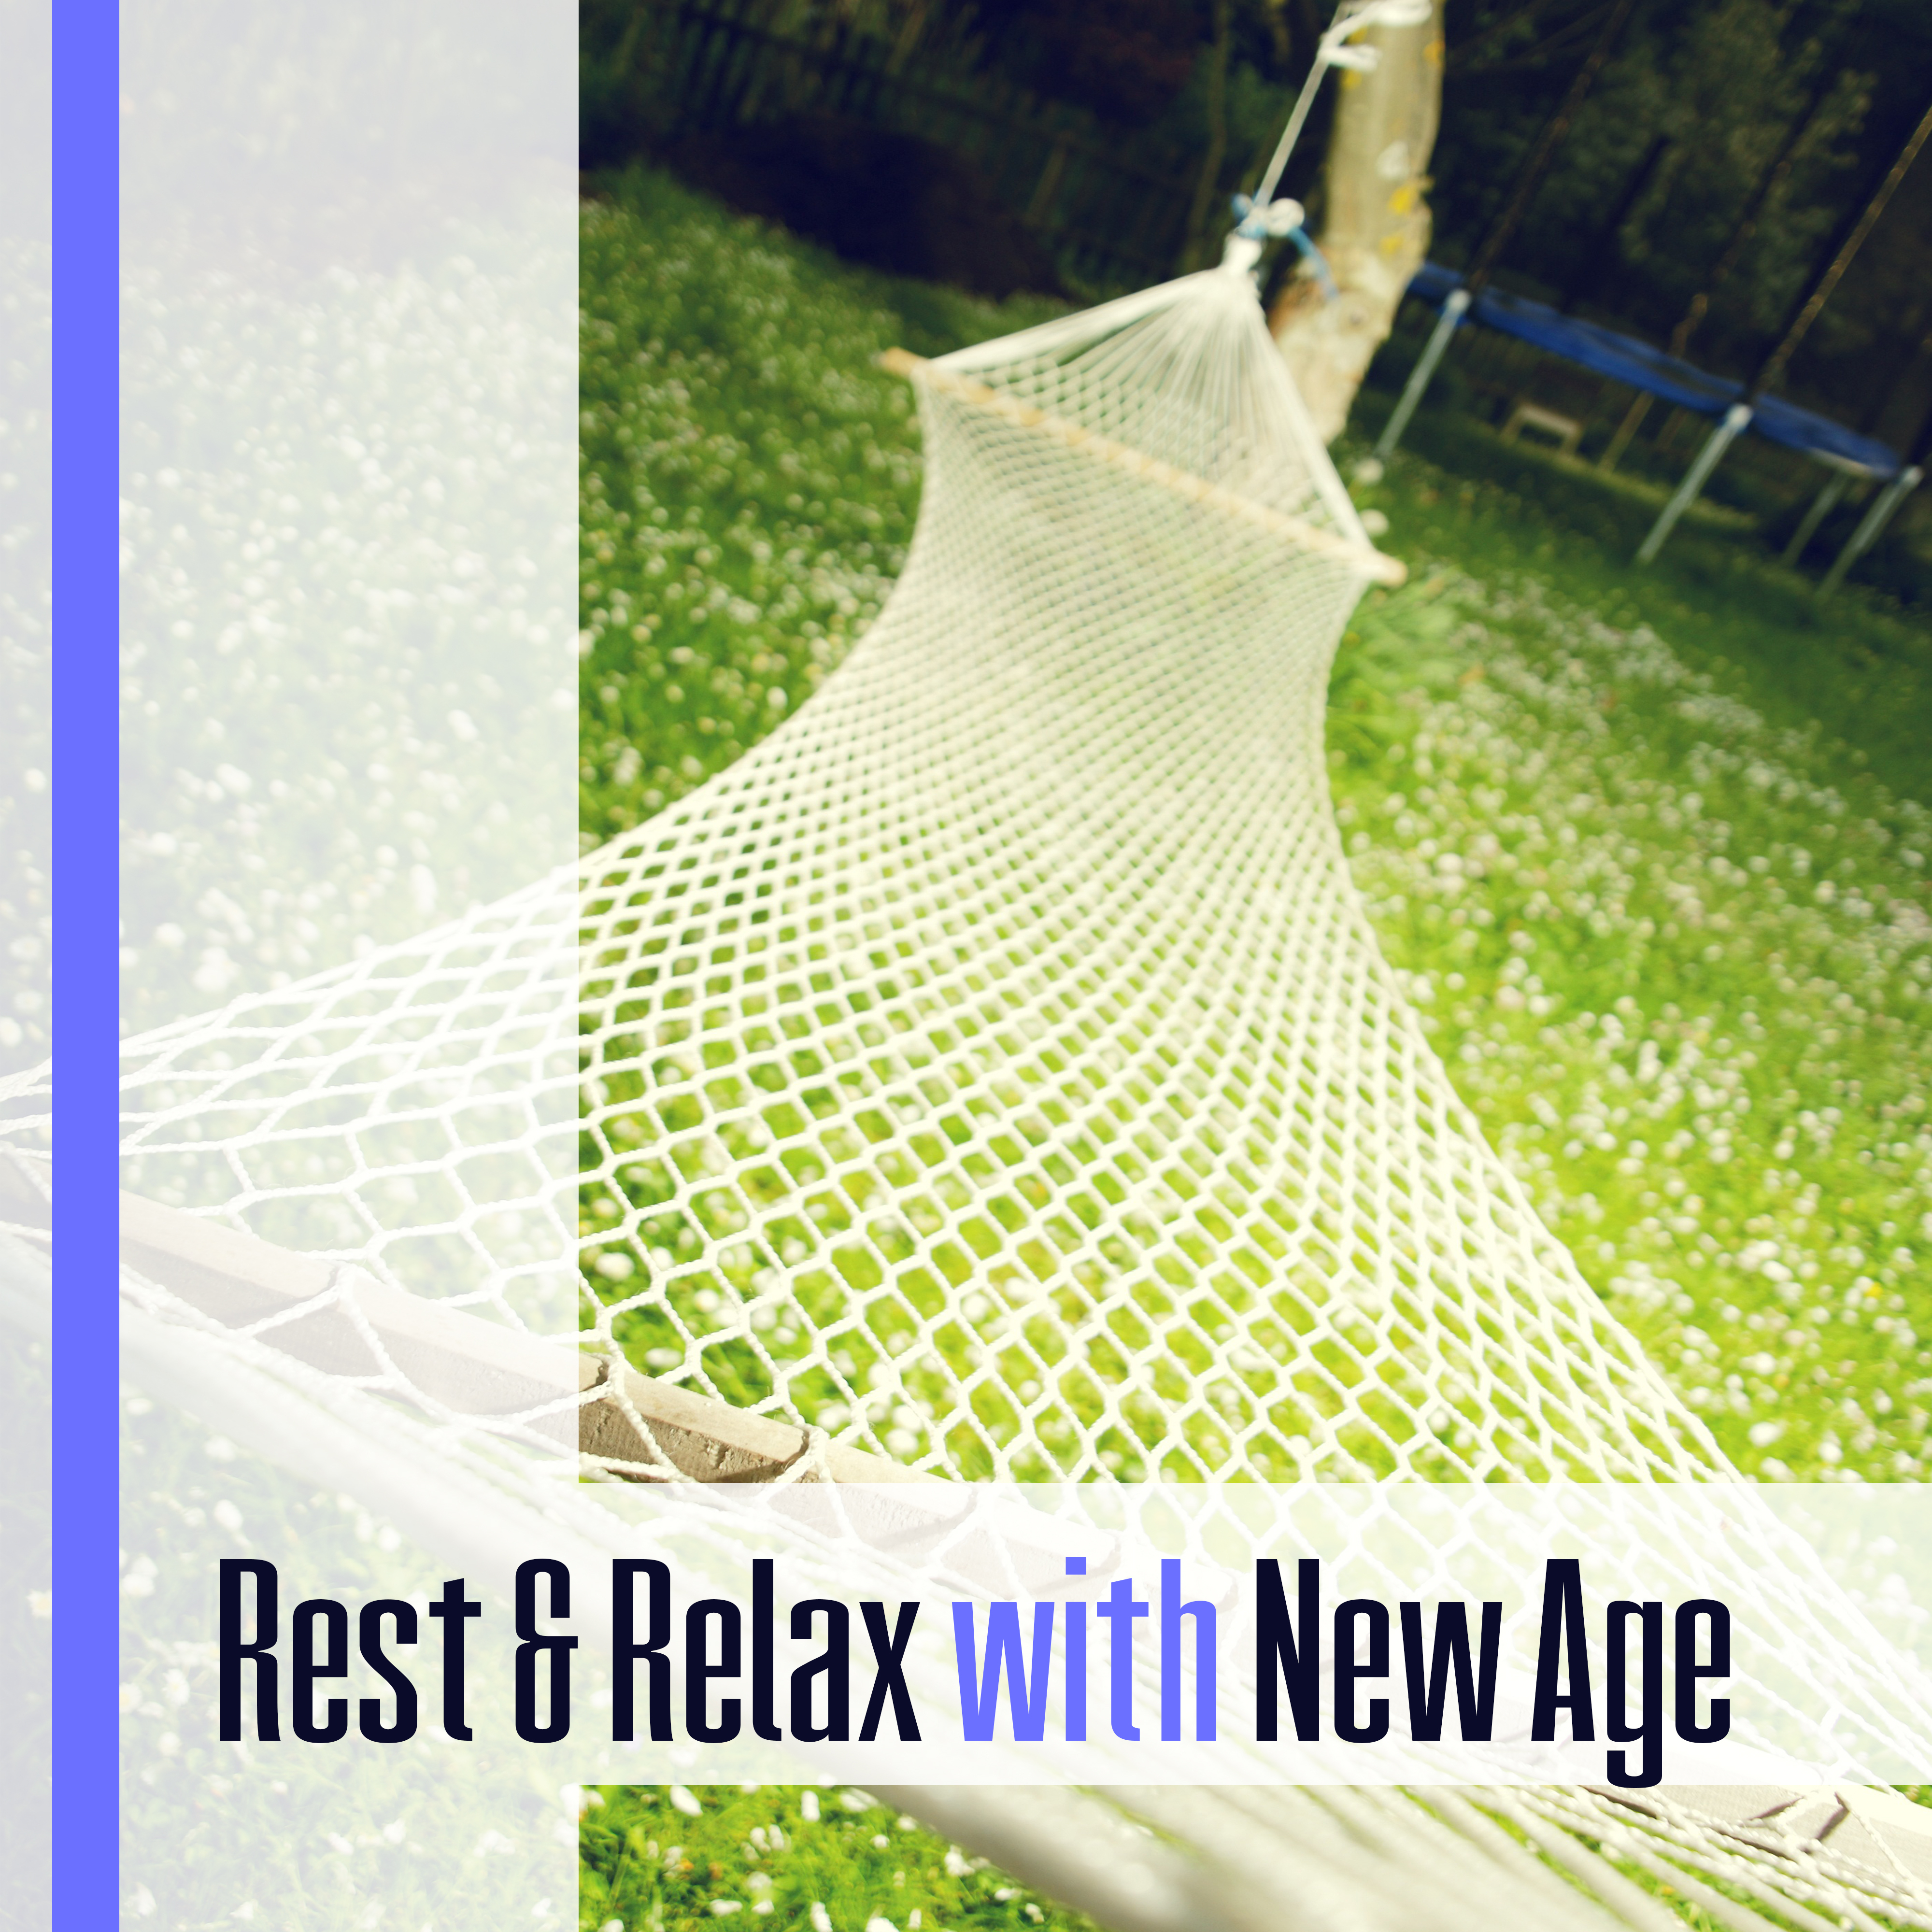 Rest & Relax with New Age – Calm Down with Nature Sounds, Music to Rest, Sleep Waves